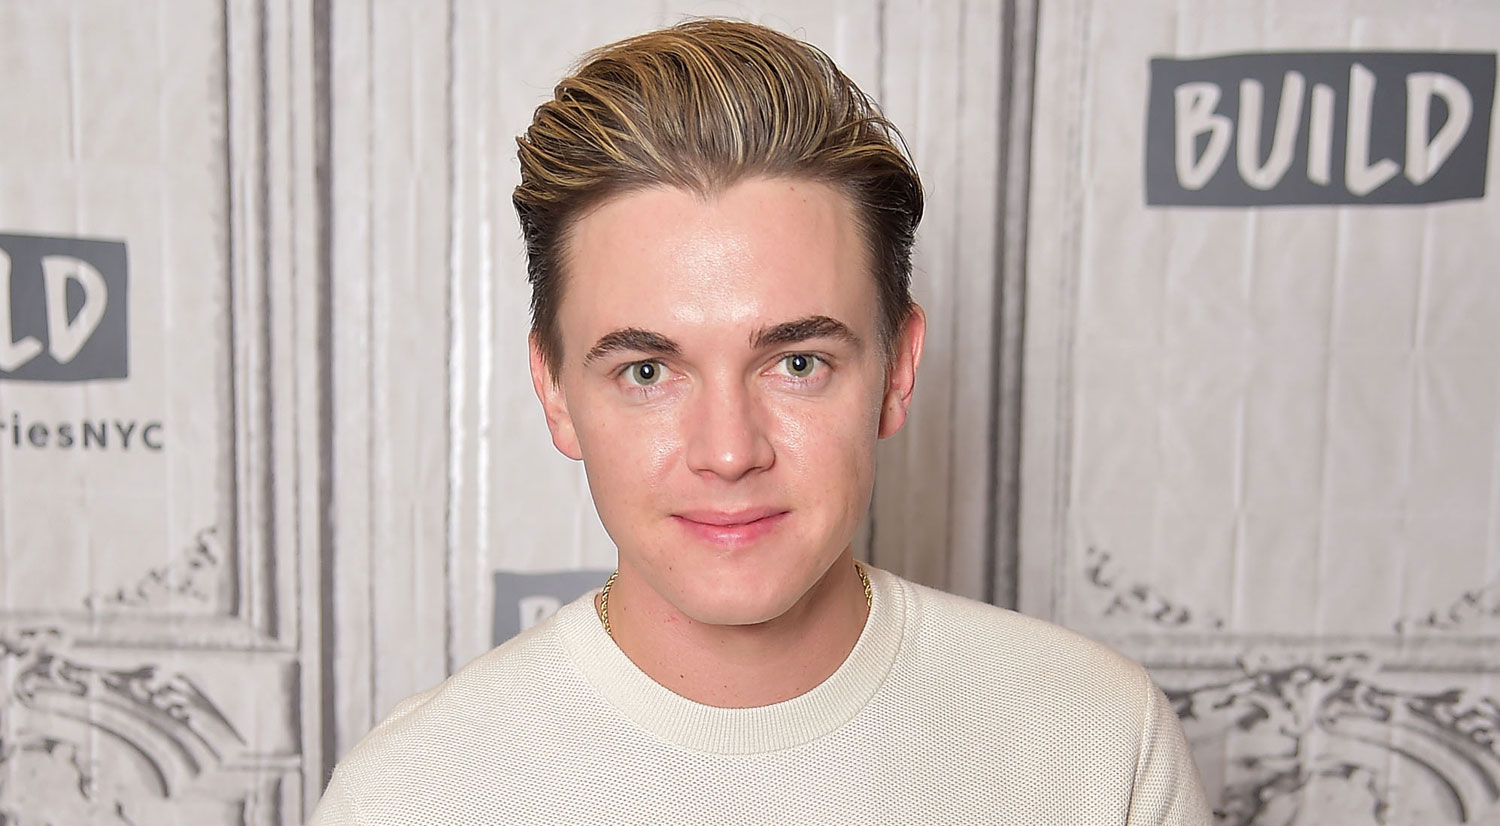 3rd place in Spoof ranking as the best male singer – great Jesse McCartney!